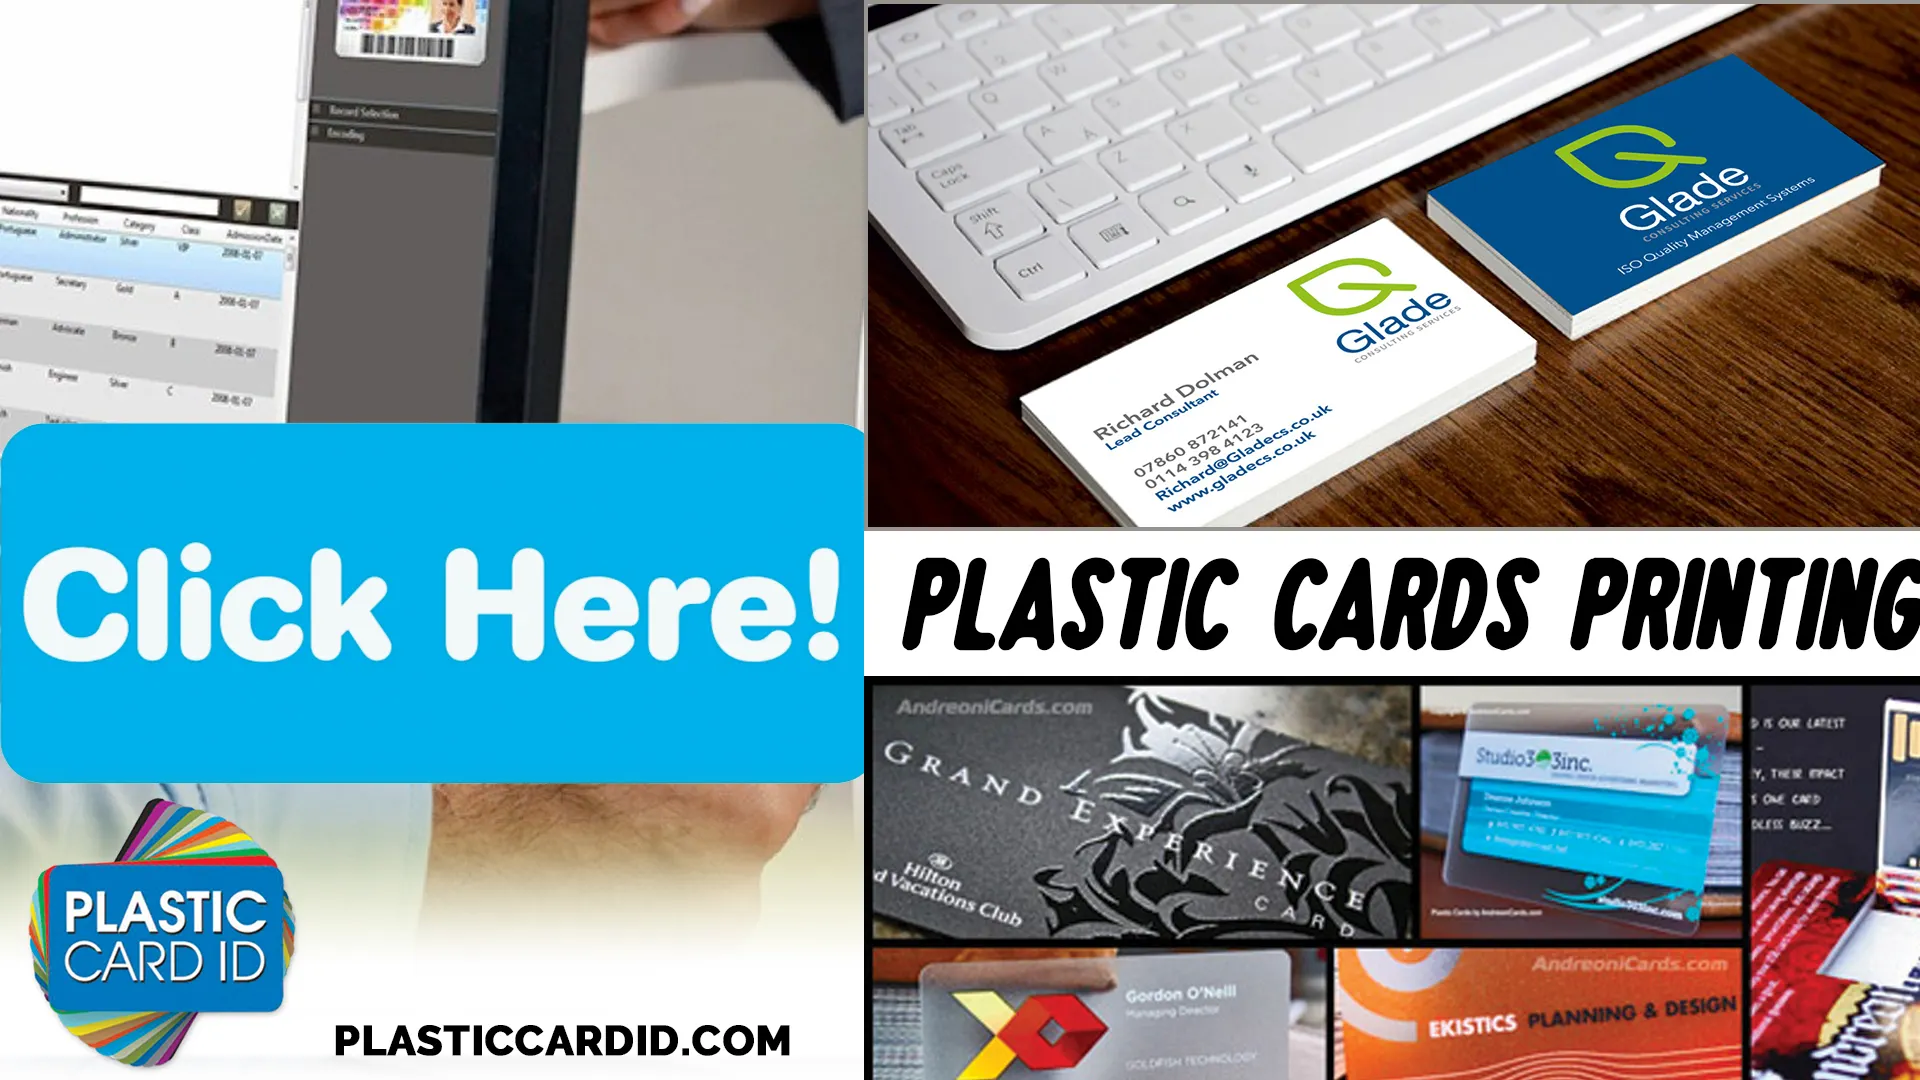 The Role of Plastic Cards in Everyday Life